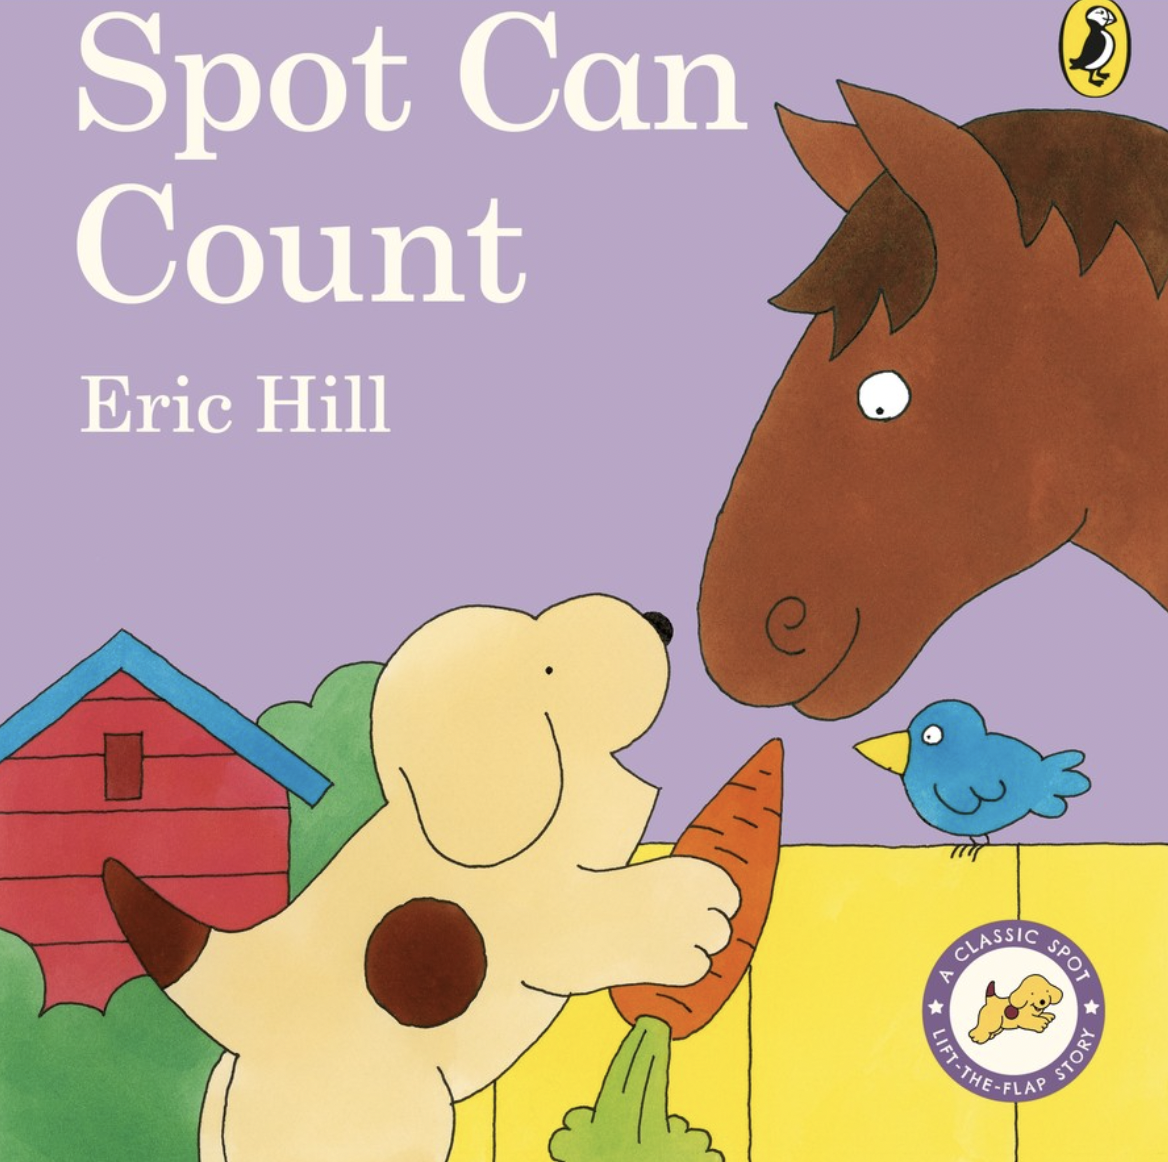 Spot Can Count by Eric Hill